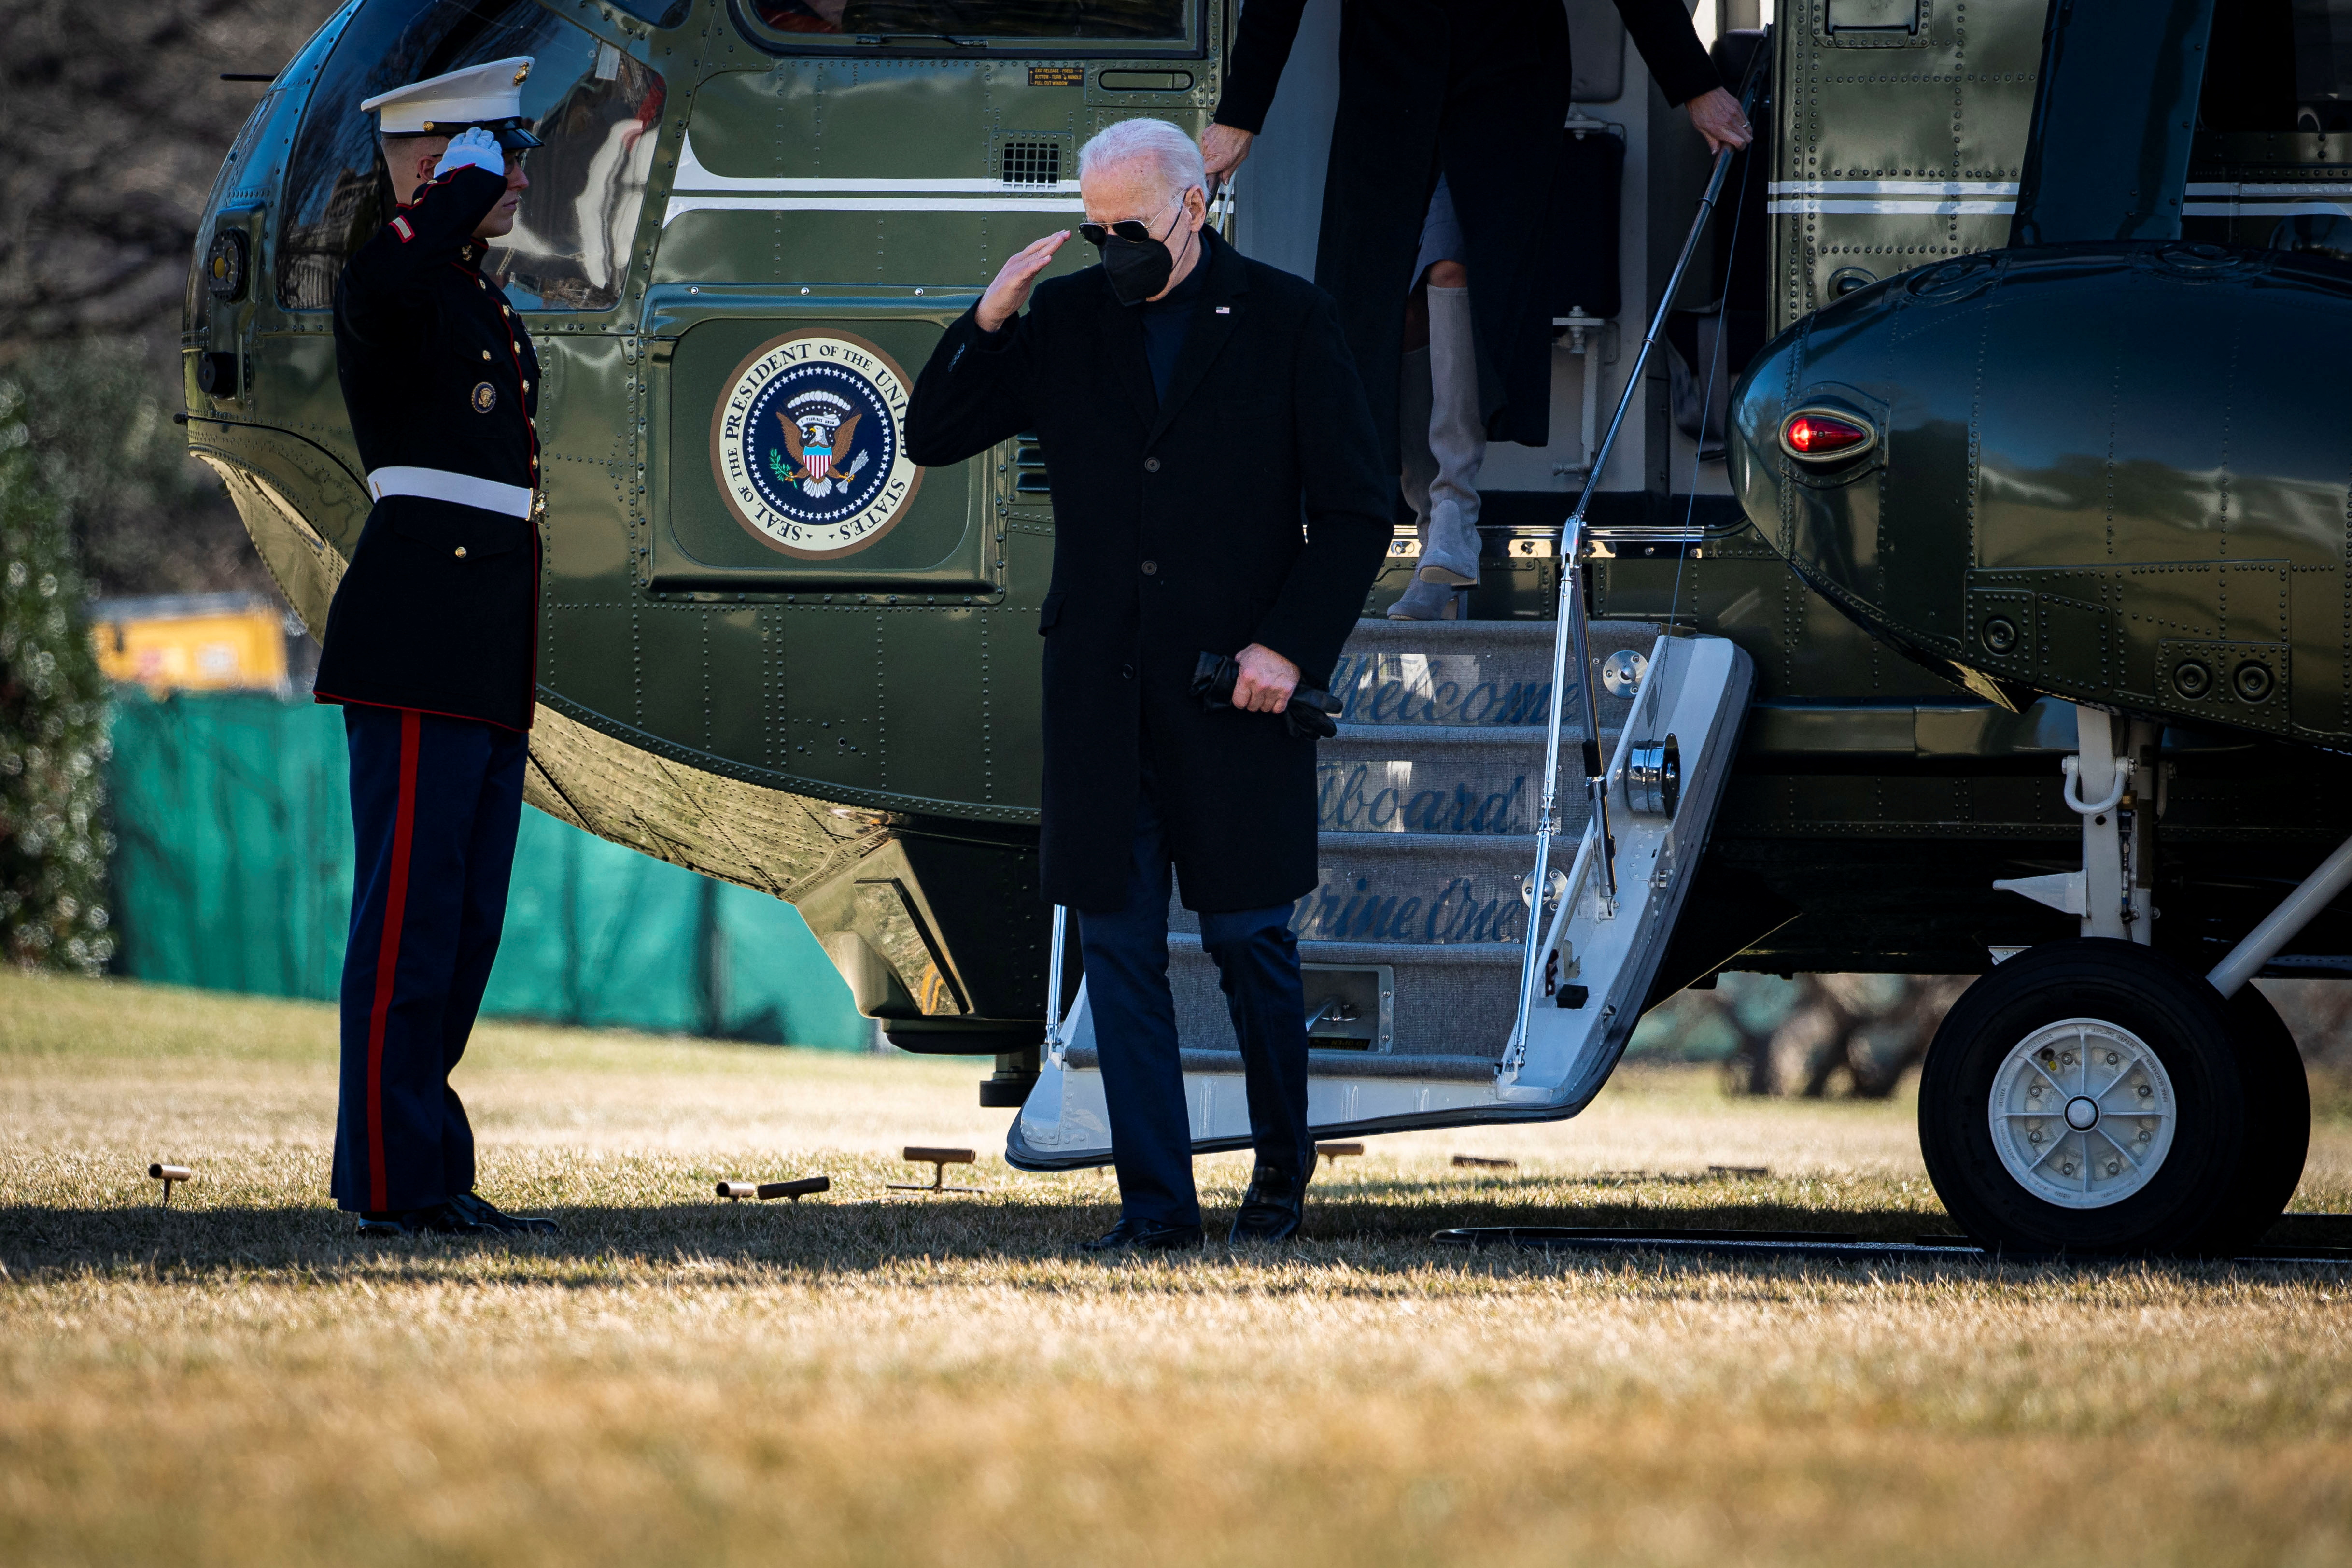 U.S. President Joe Biden salutes as he arrives on Marine One on the South Lawn of the White House in Washington